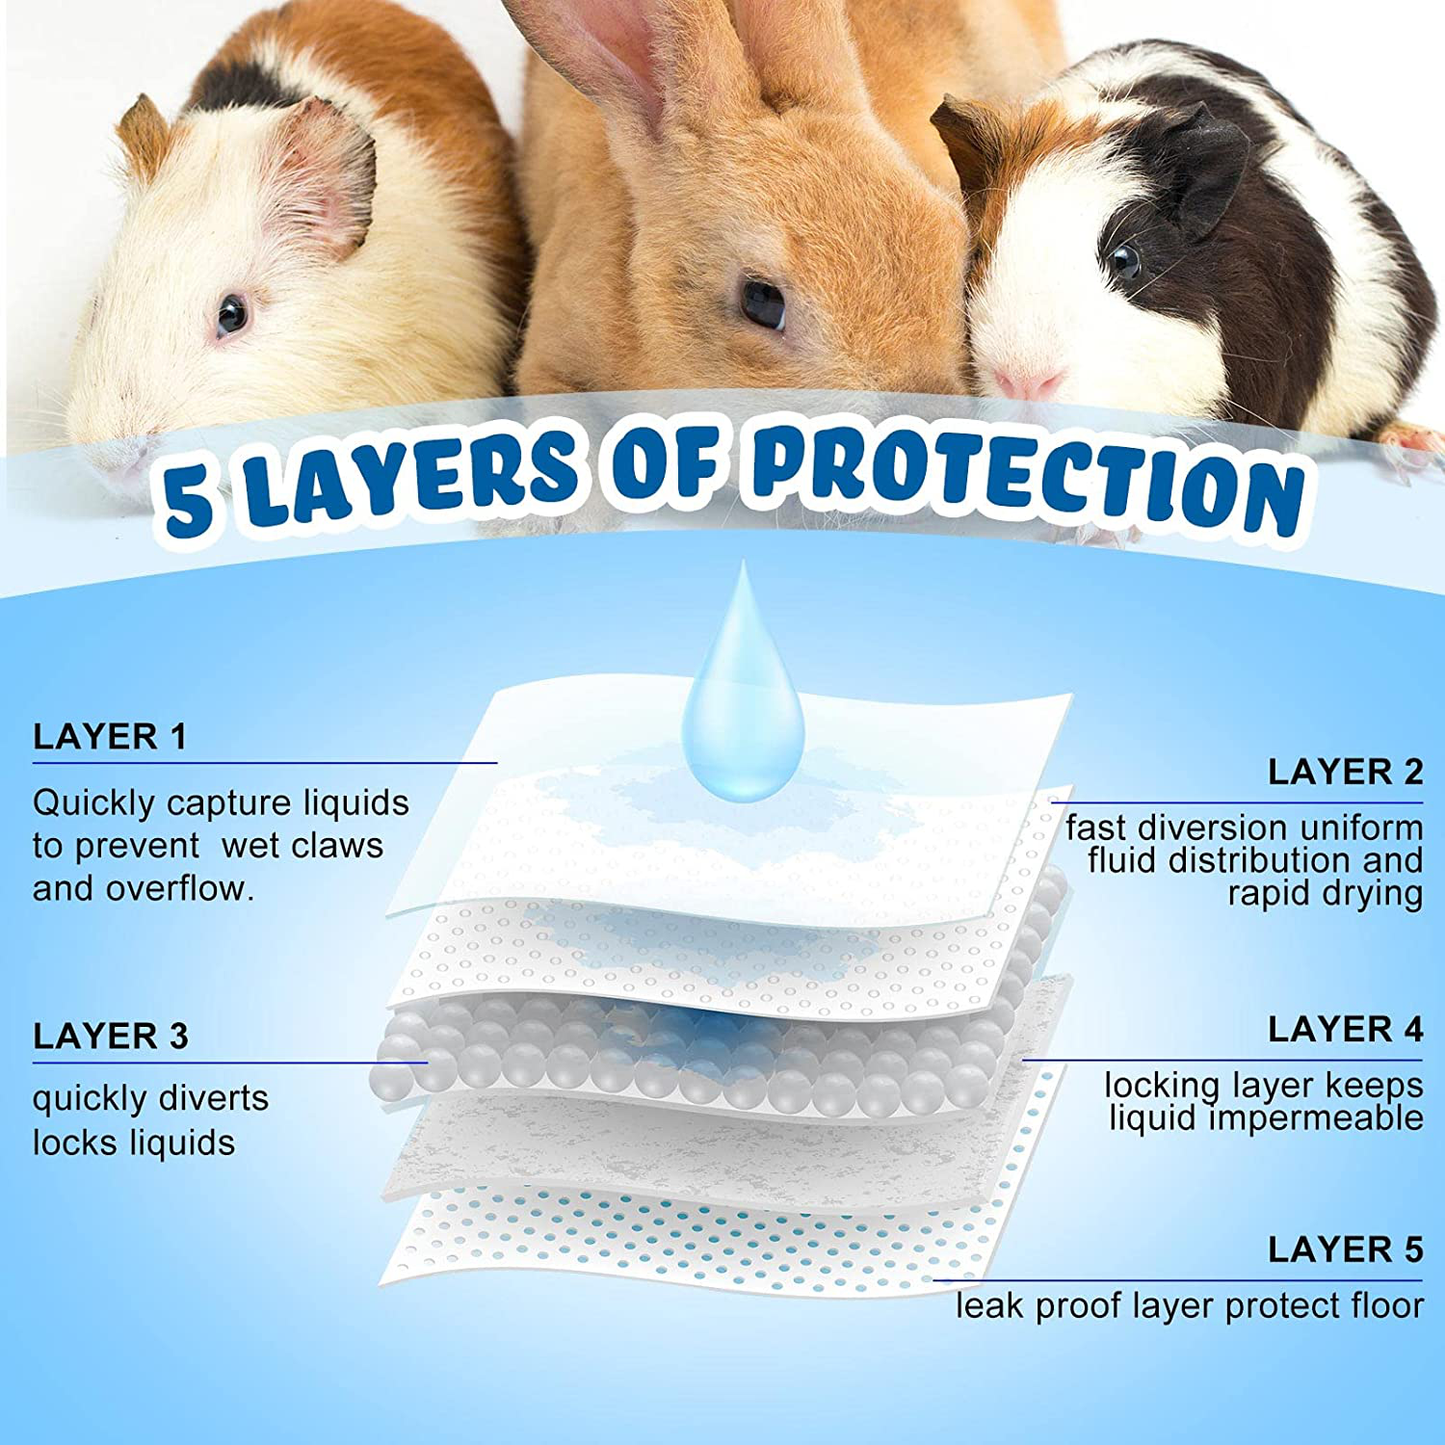 Nuanchu 100 Pieces Blue Rabbit Pee Pads Super Absorbent Disposable Diaper Pads Potty Training Pads Healthy Cleaning Underpads for Guinea Pigs Hedgehogs Hamsters